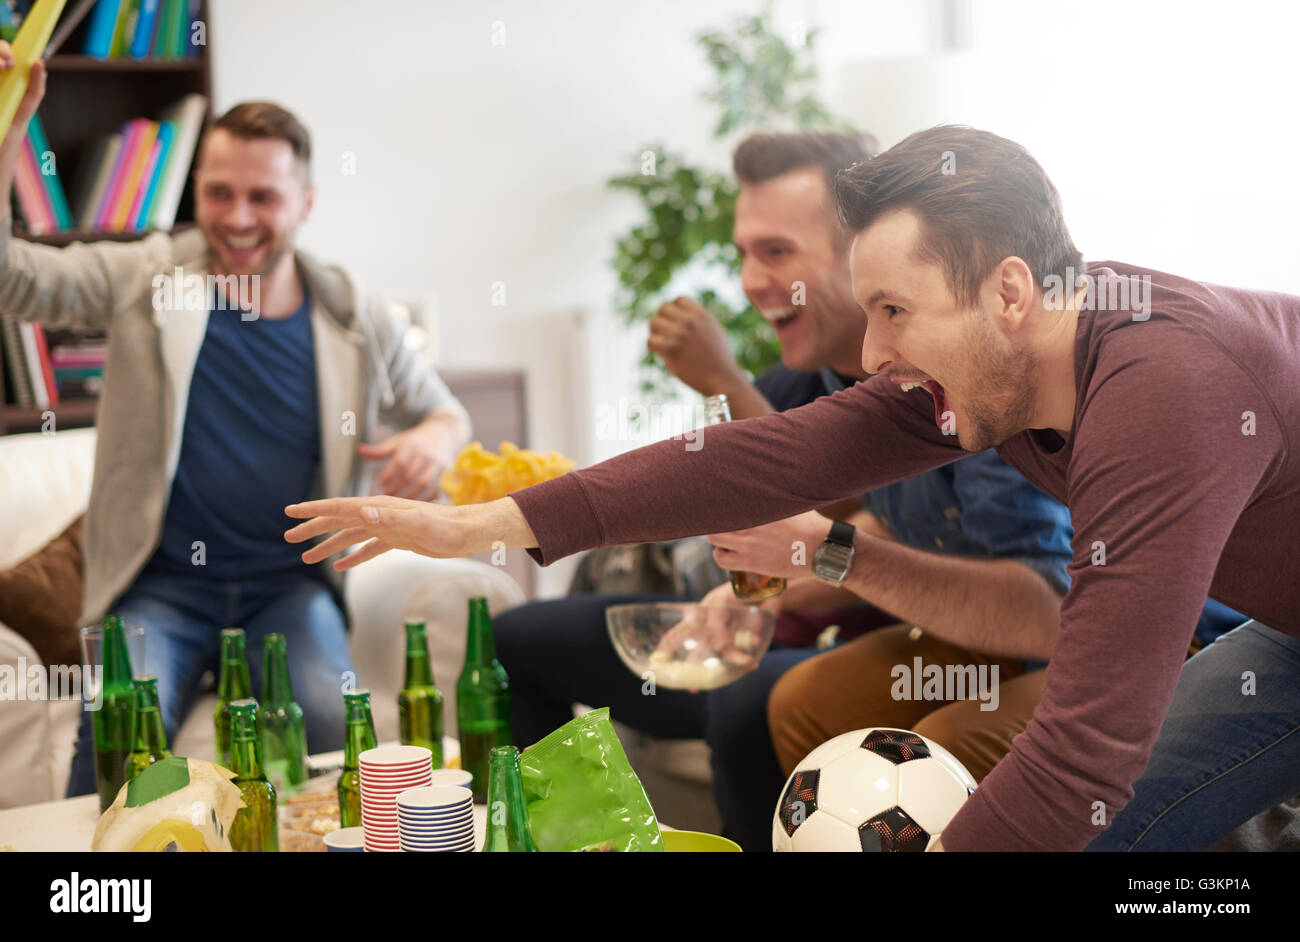 Group of men watching sporting event on television holding football celebrating Stock Photo